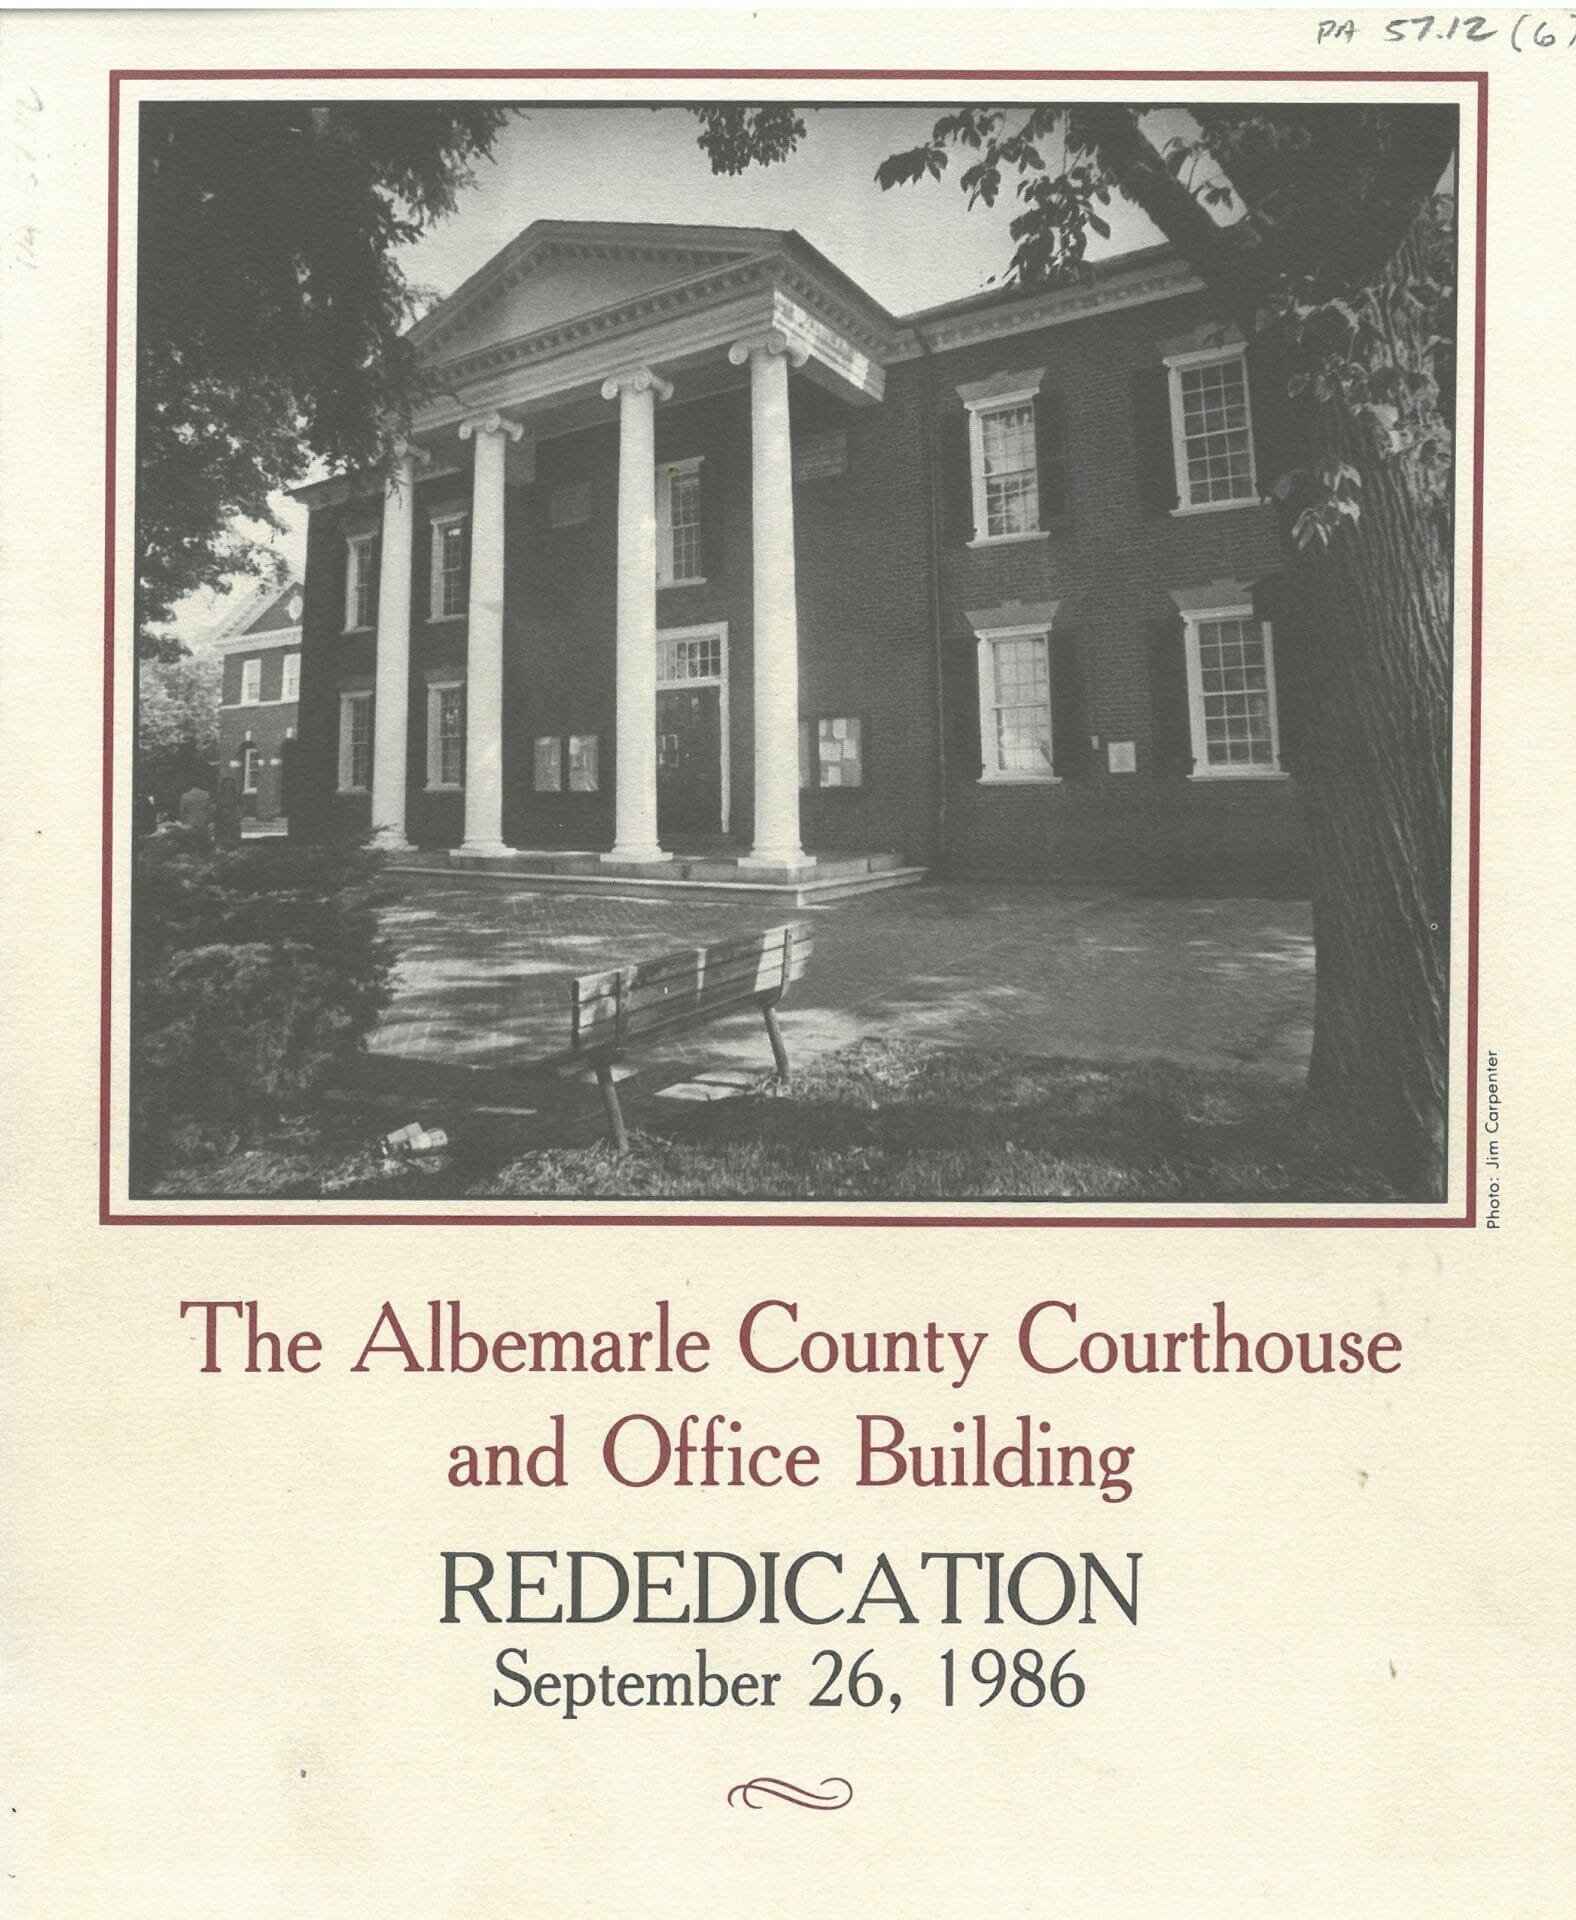 Albemarle County collection Courthouse and Courts The Albemarle